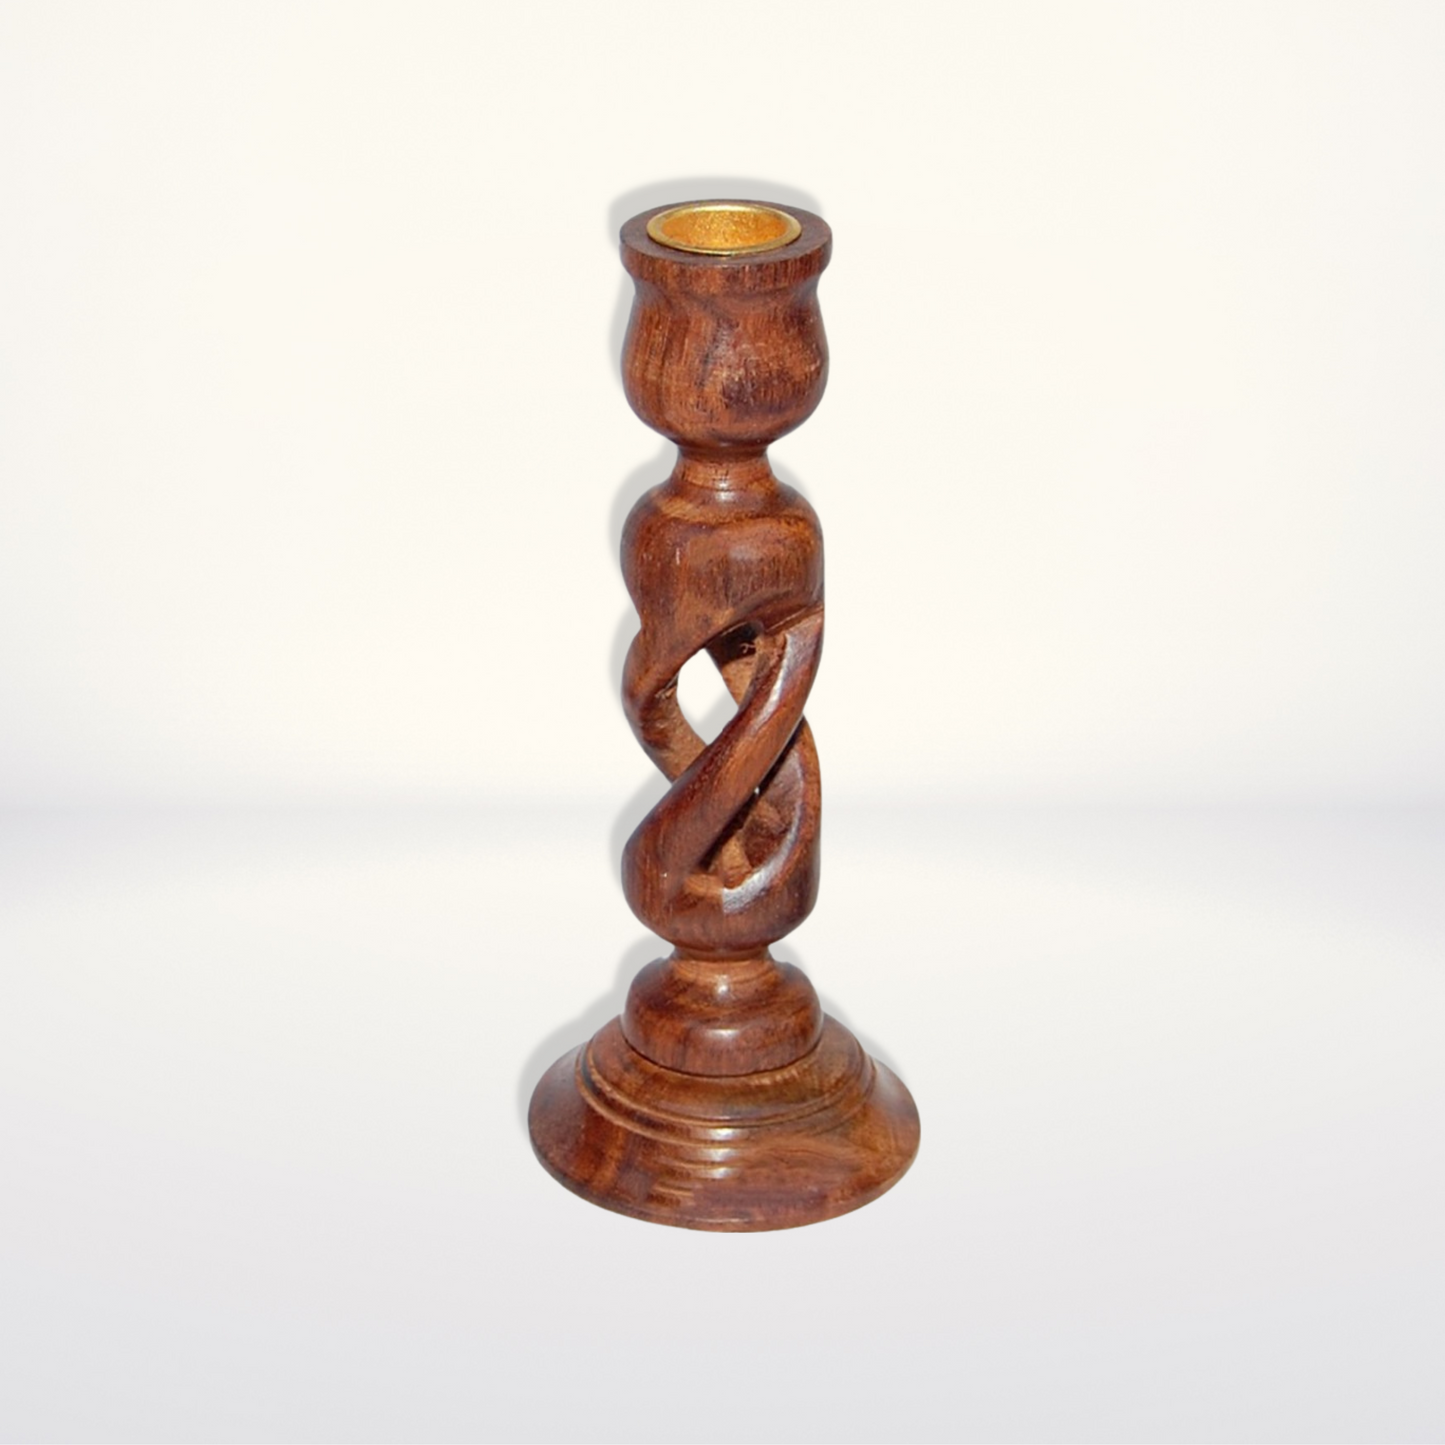 Handcrafted Wooden Candlestick Holder - Rope Design - Stylla London